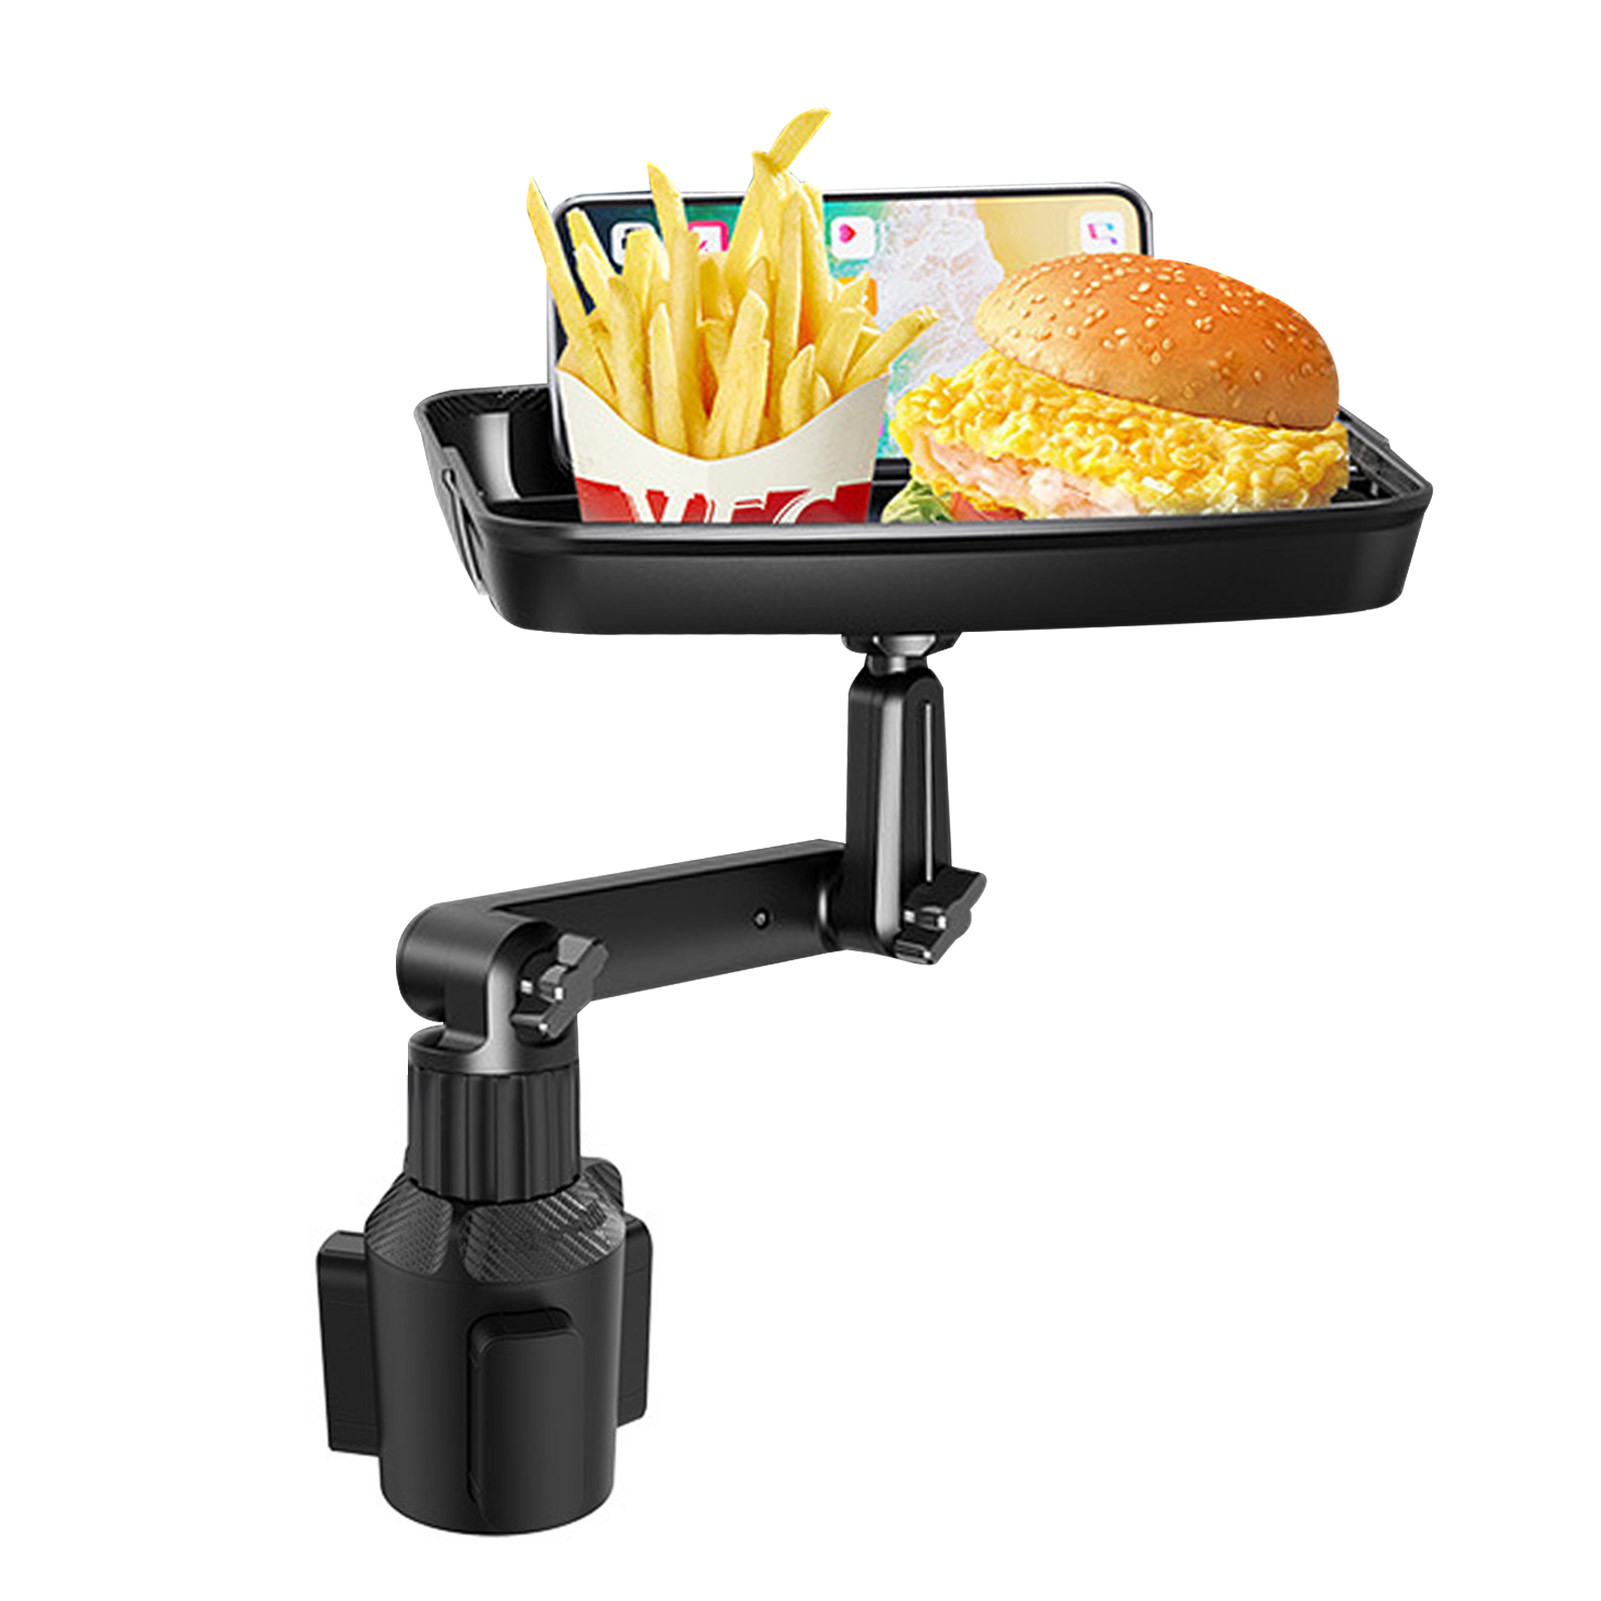  Shansis Car Cup Holder Tray Expander, 4 in 1 Detachable Car  Food Table Tray for Eating, Dual Cup Holder with Food Tray, Expandable Car  Cup Holder Swivel Tray, Road Trip Essentials